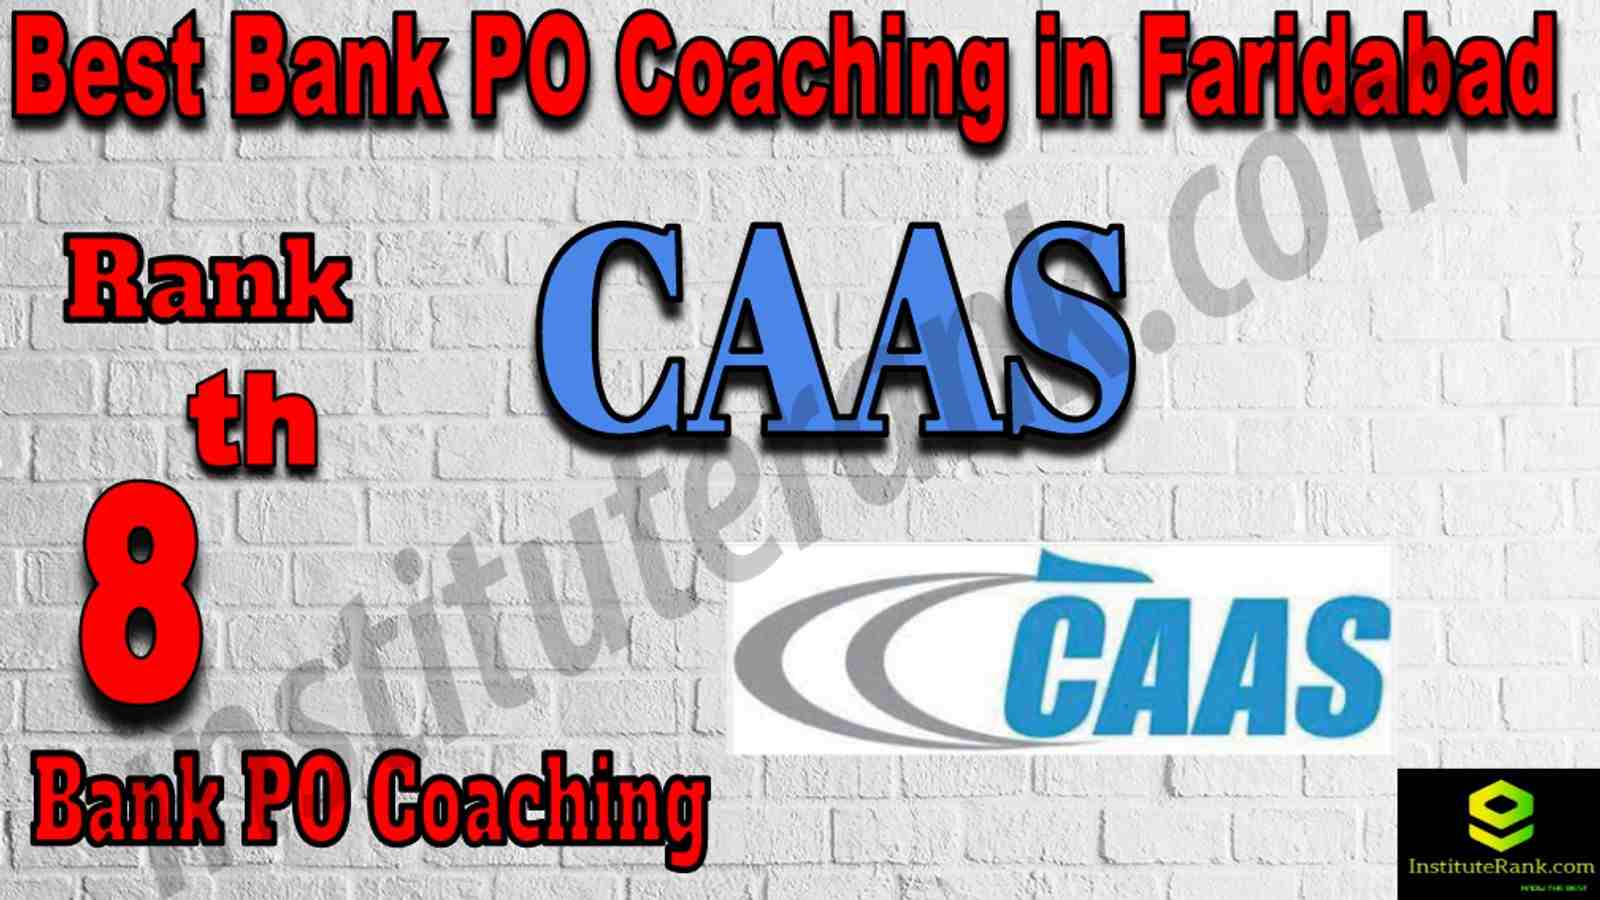 8th Best Bank PO Coaching in Faridabad